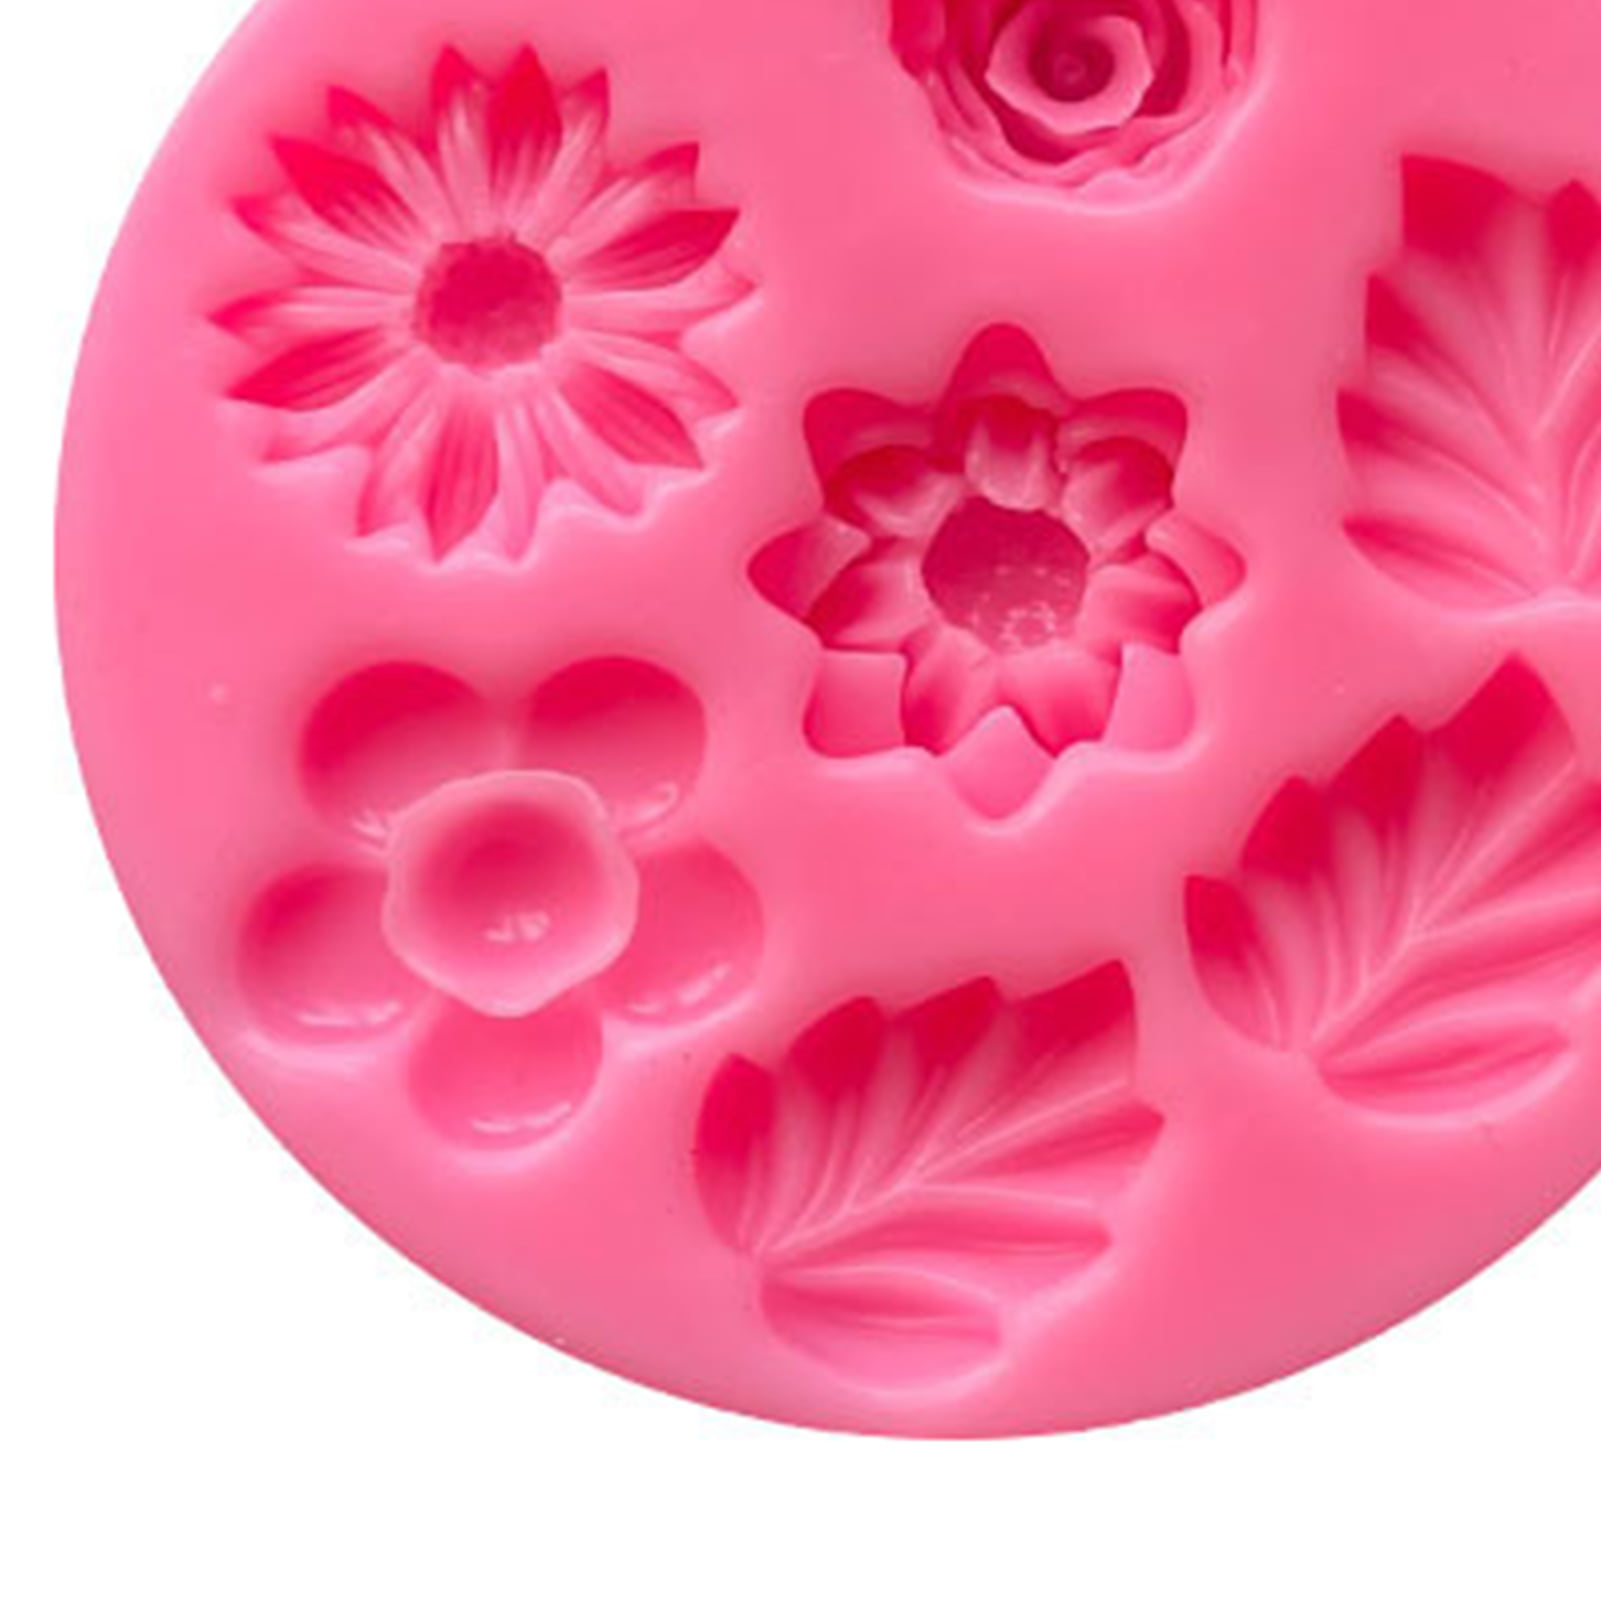 Naturegr Chocolate Mold 3D Flower Design Wide Application Rose Flower  Silicone Mold